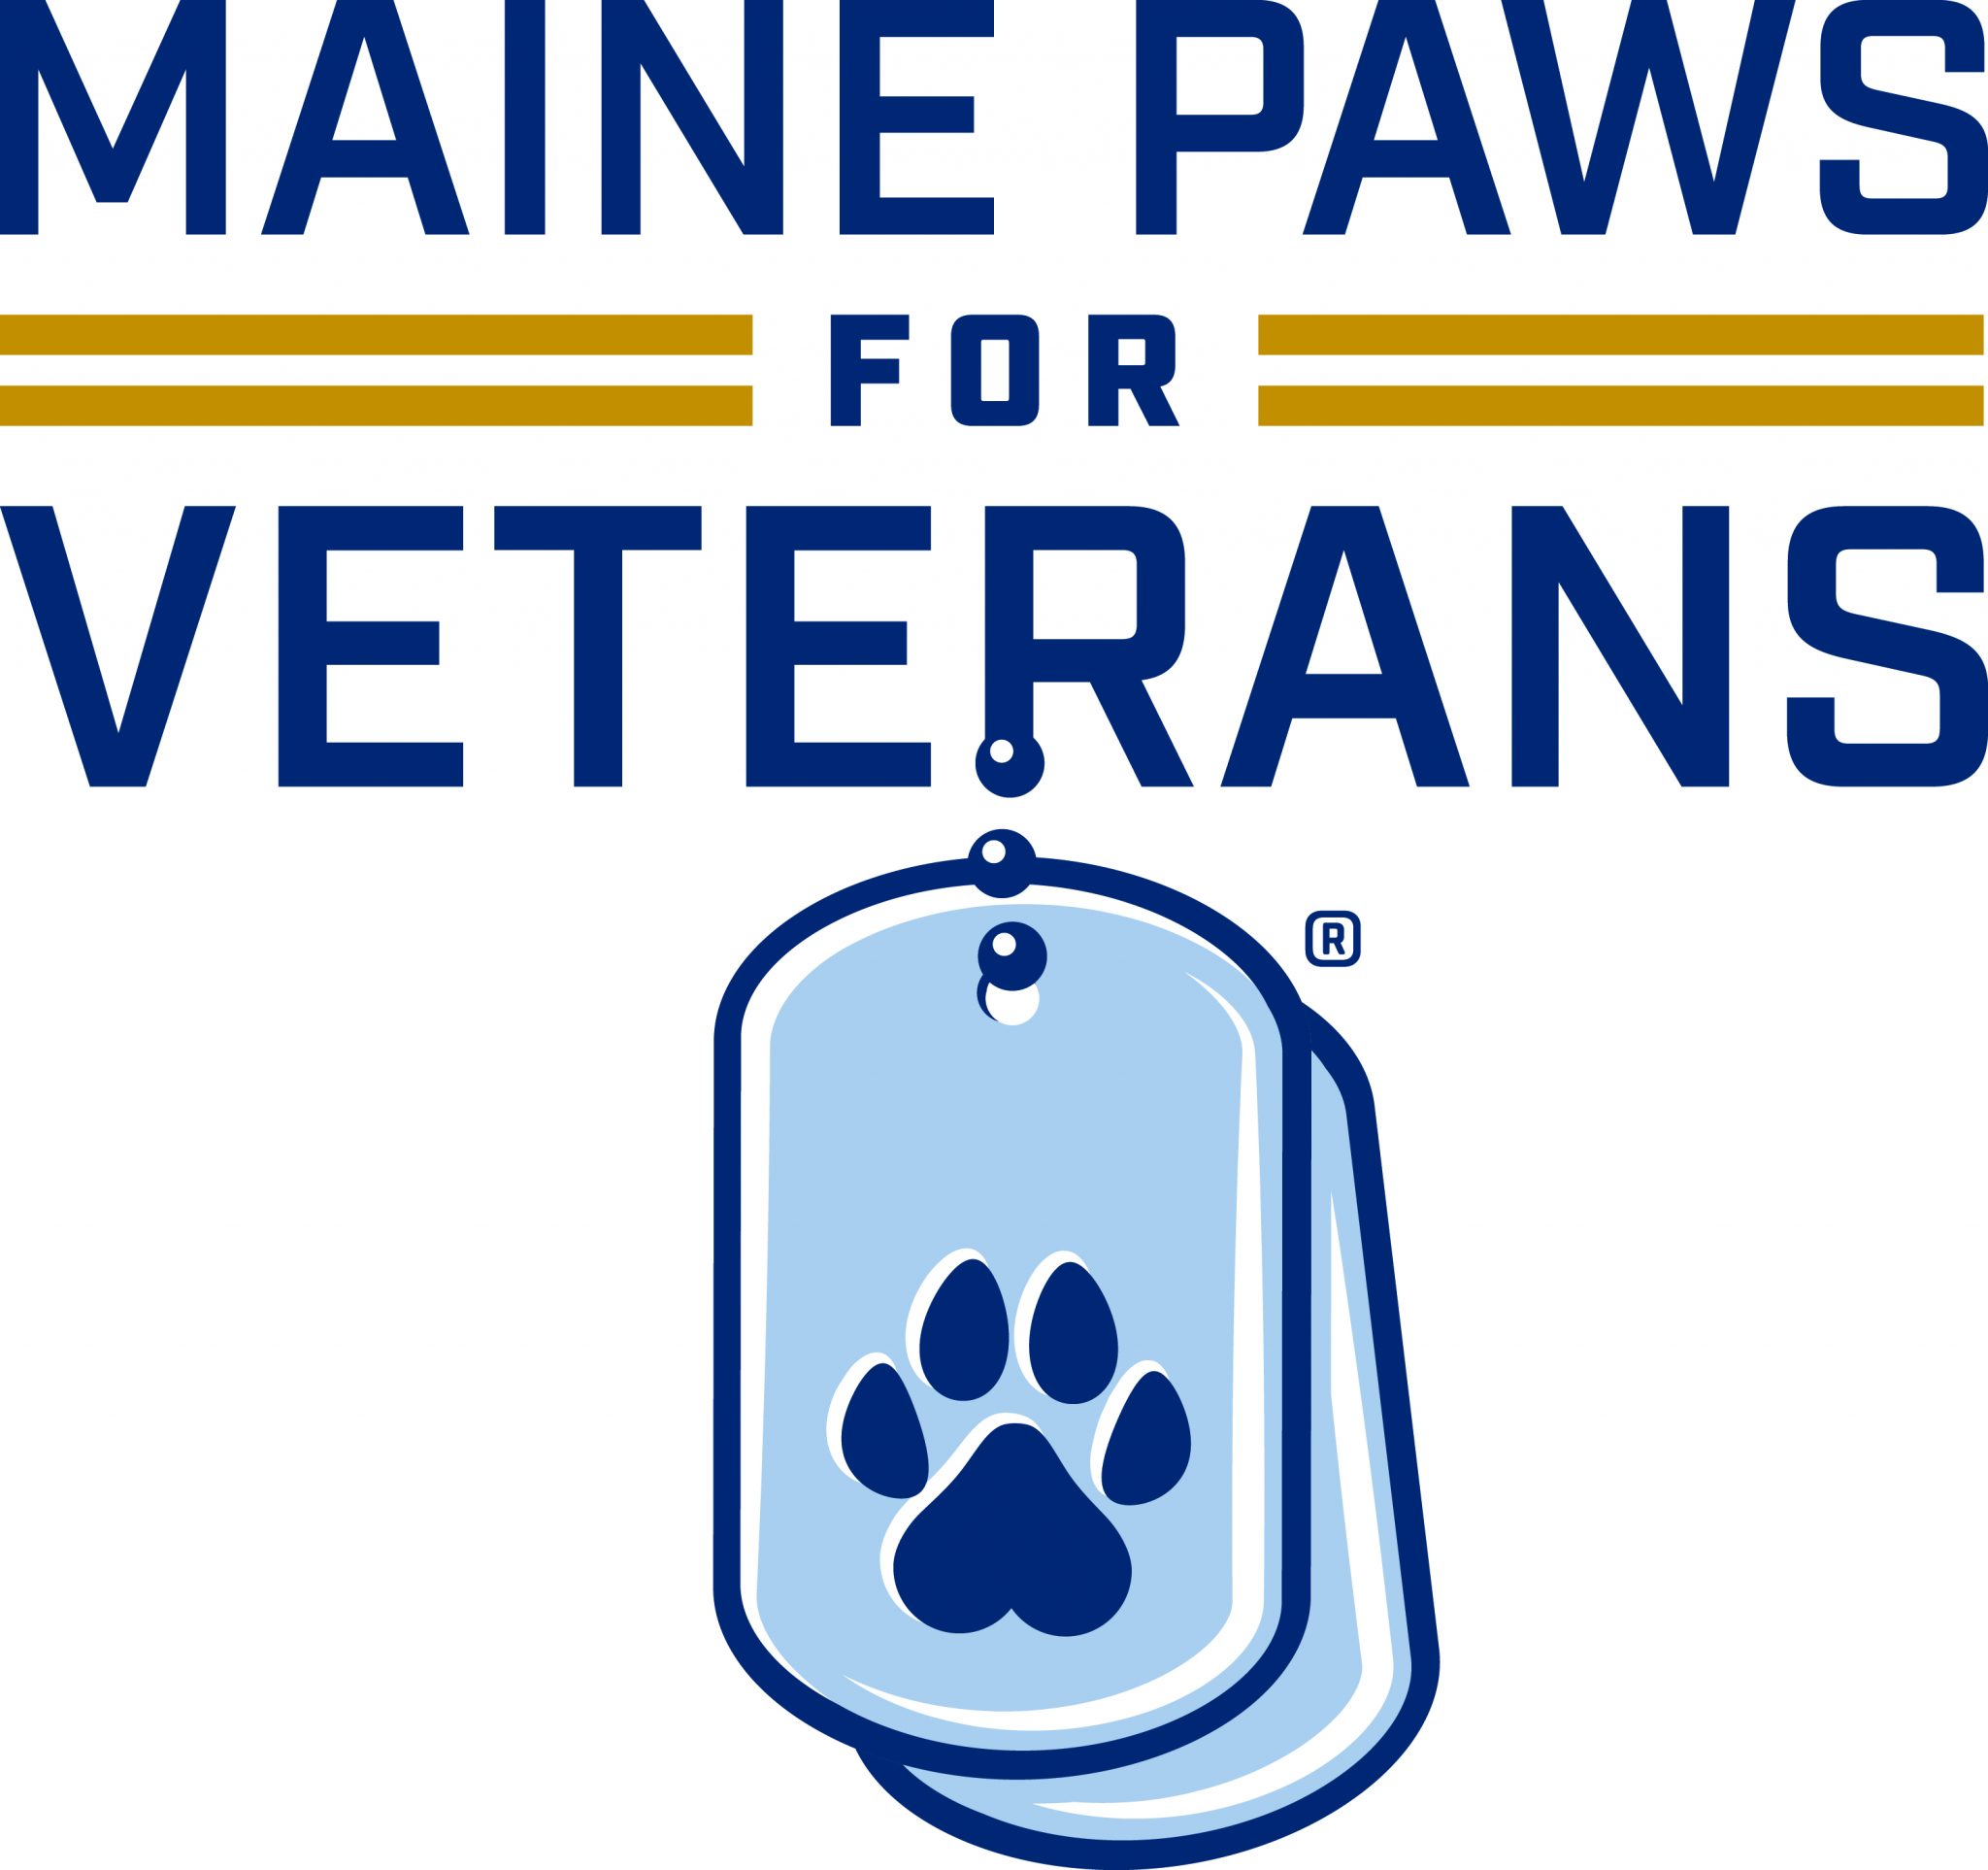 Maine Paws for Veterans